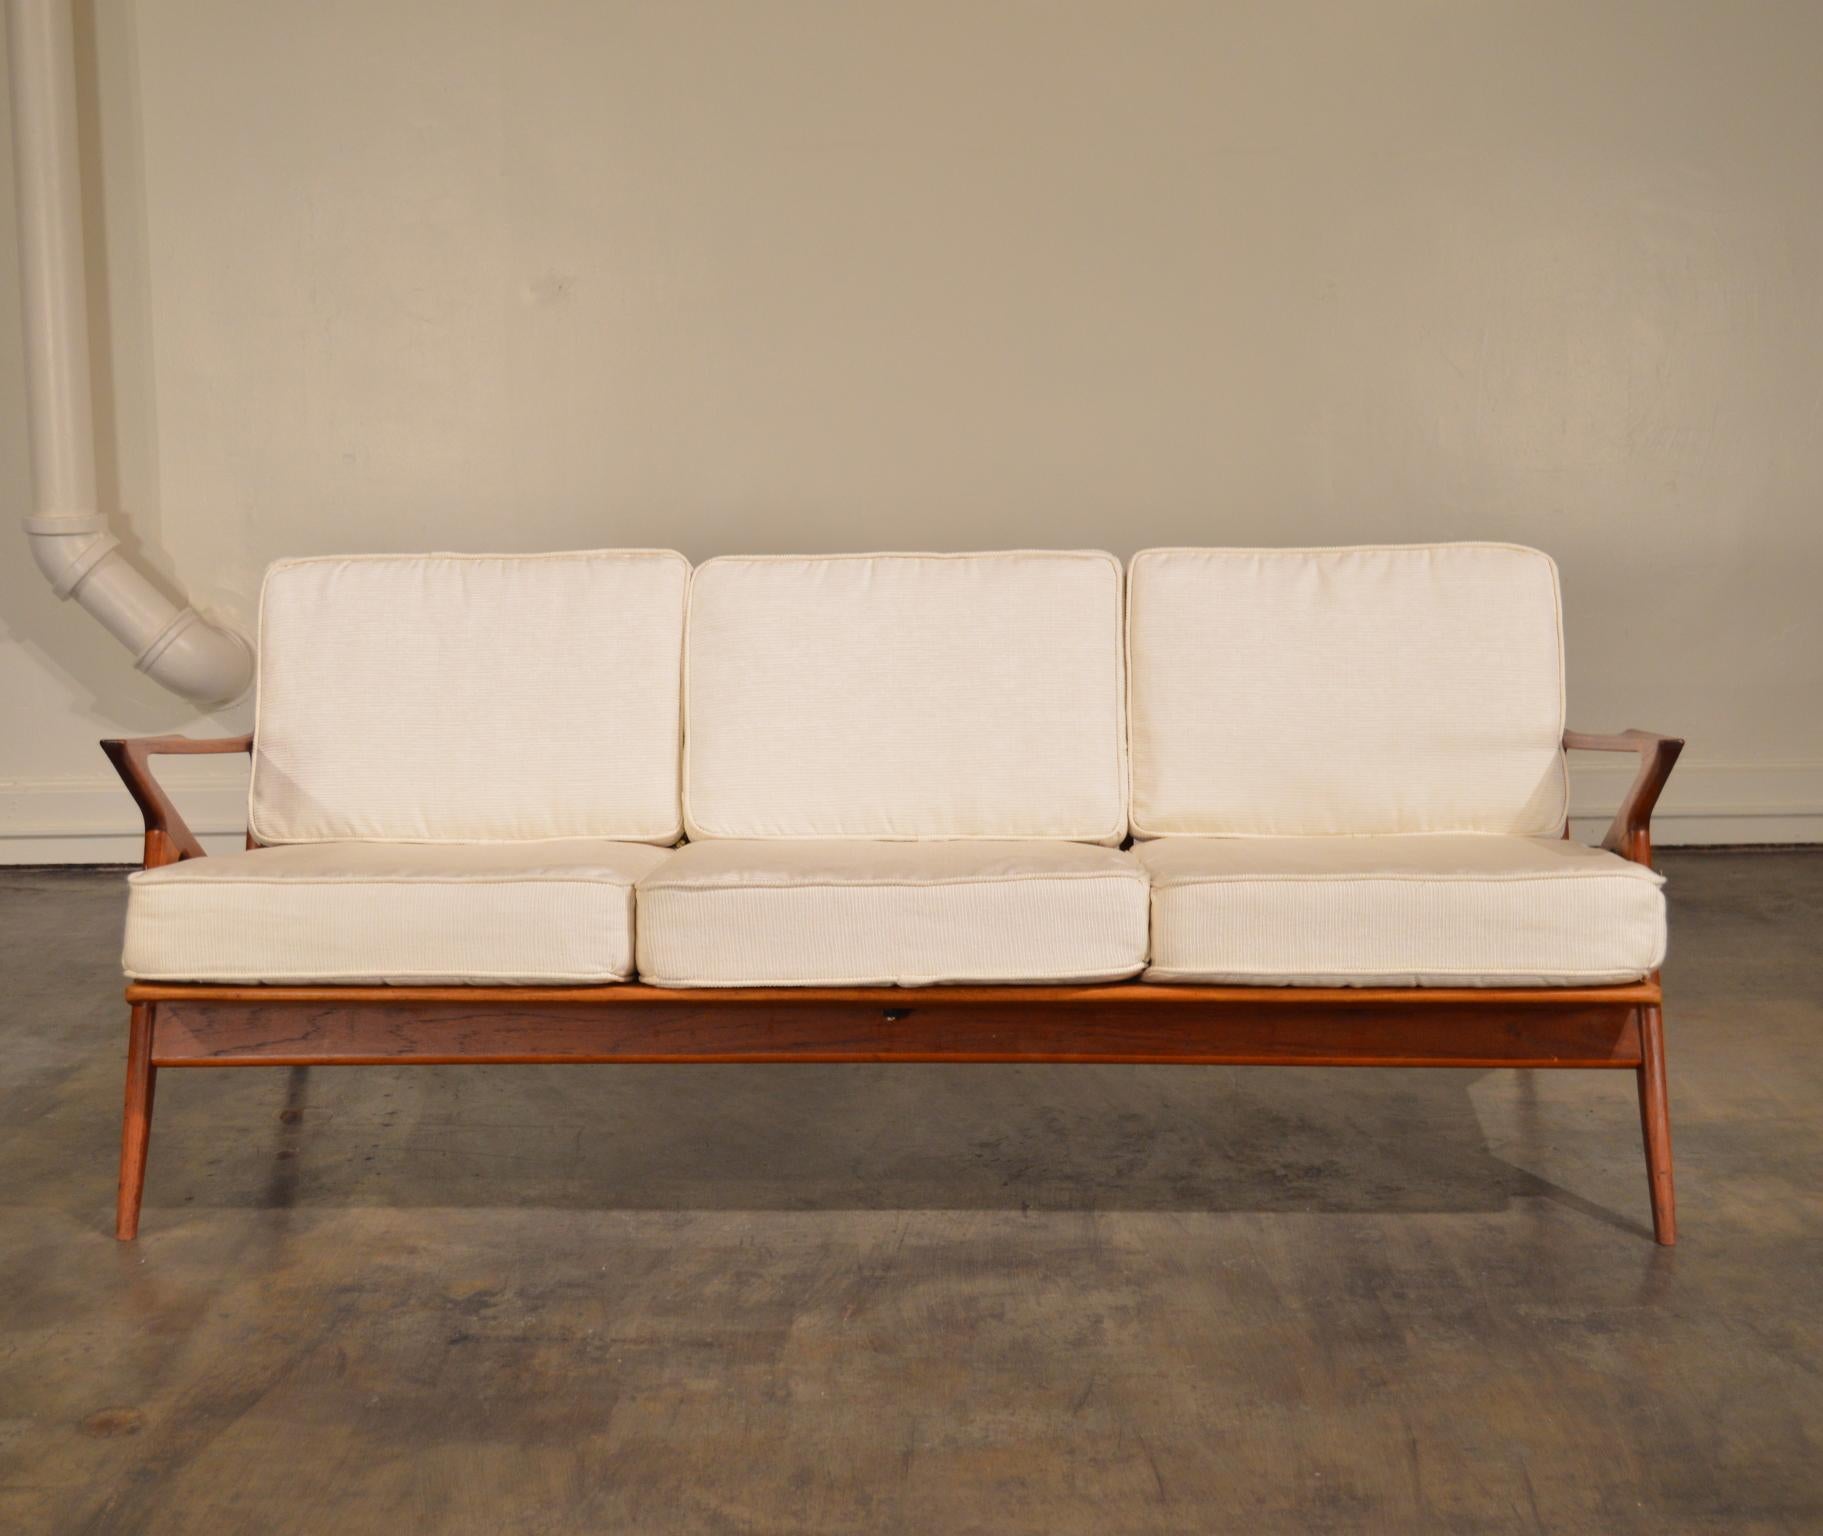 3-seat teak sofa designed by Poul Jensen. Manufactured in Denmark for Selig. The 